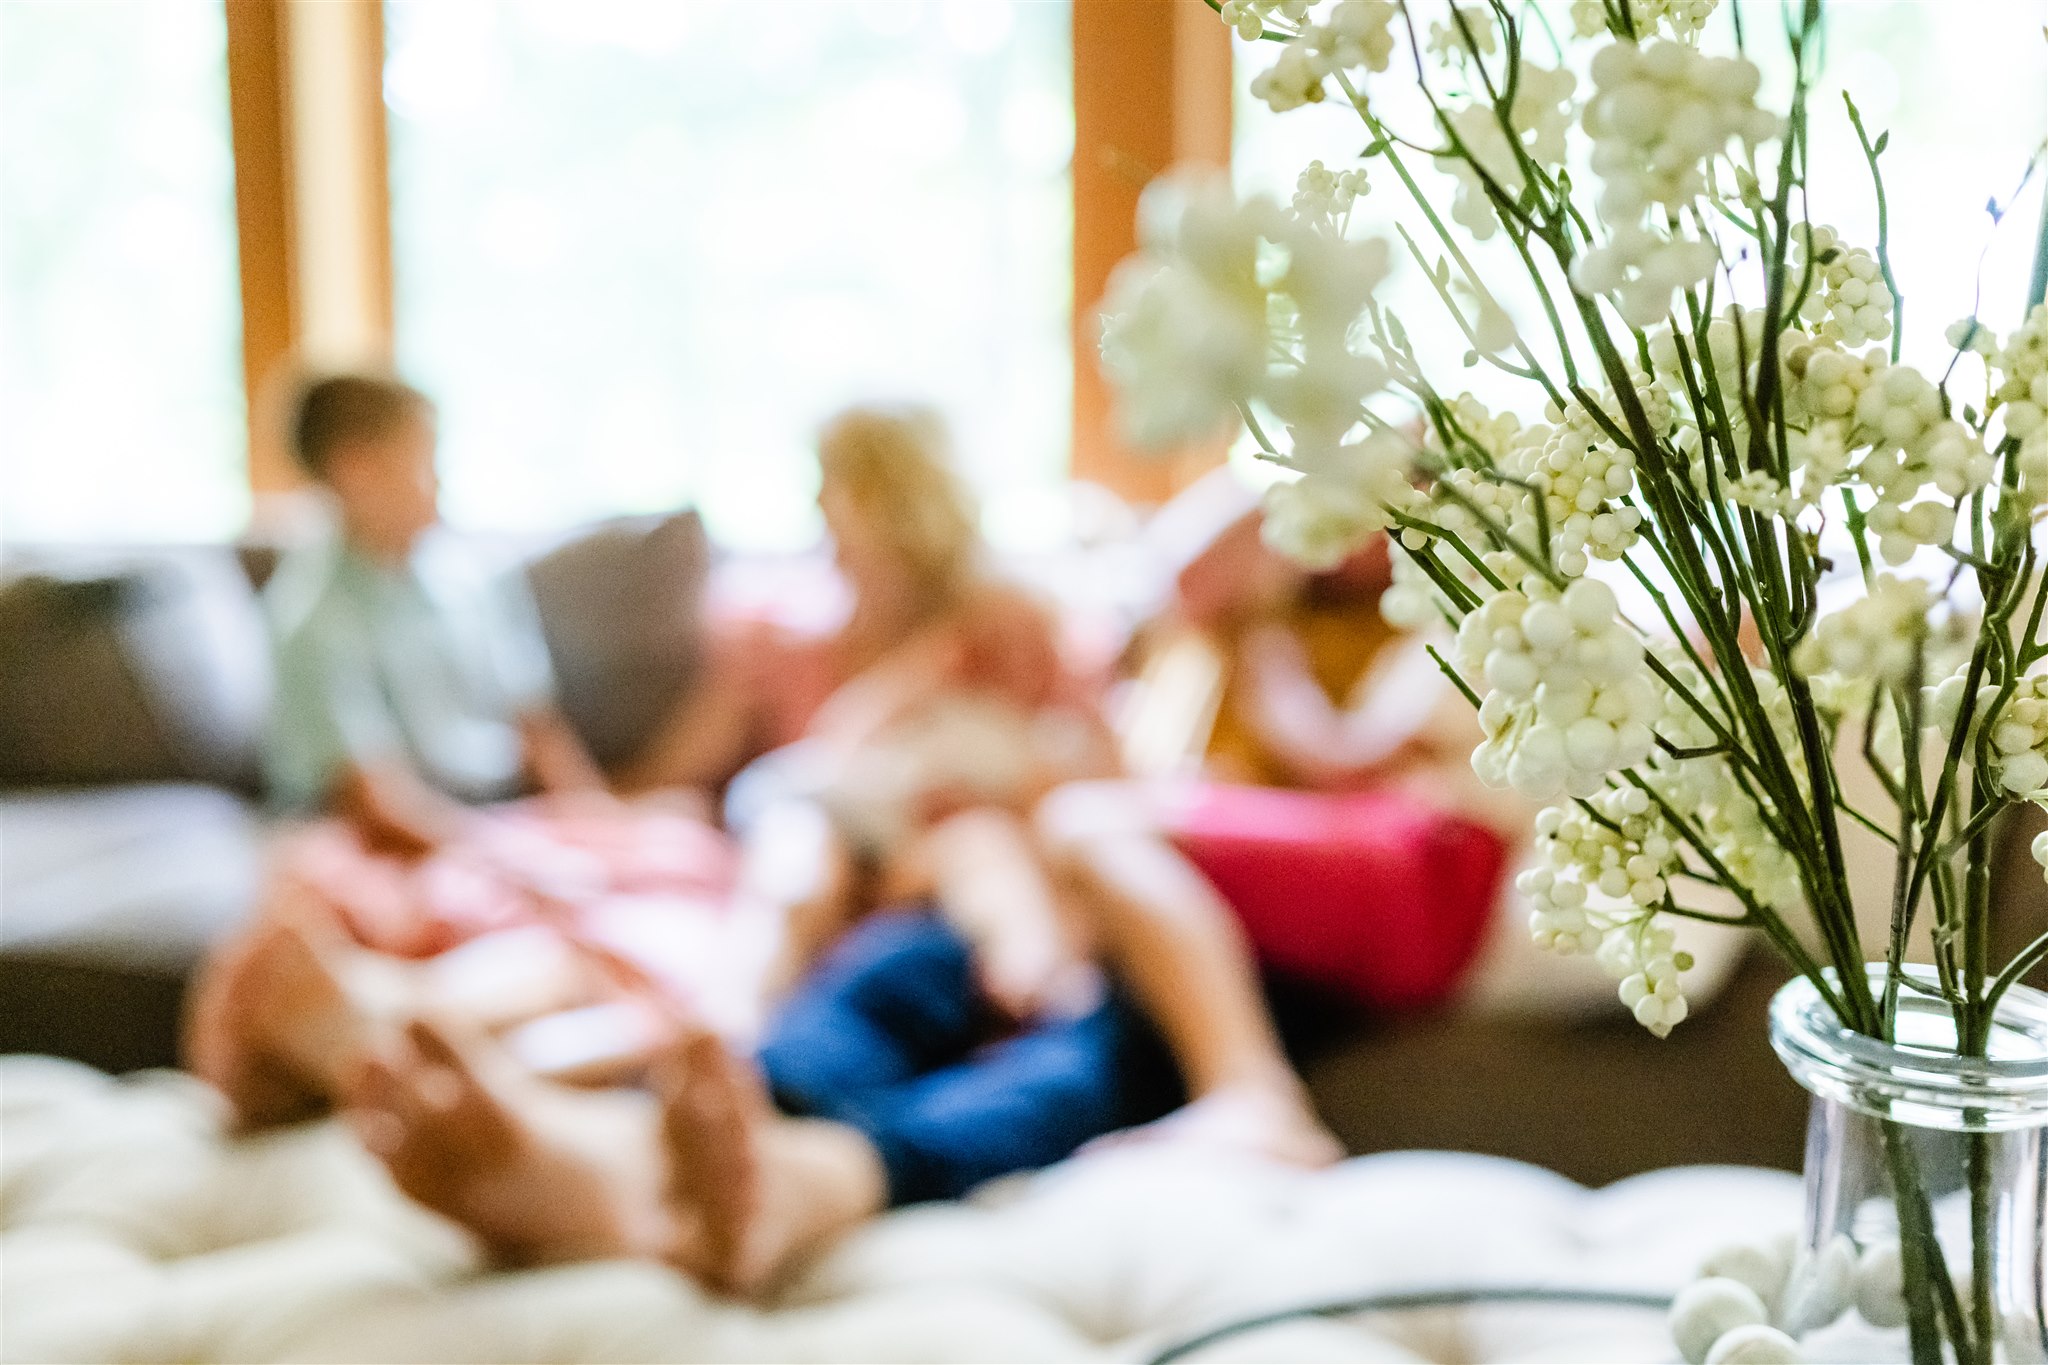 Details of white flowers in a vase in a family living room